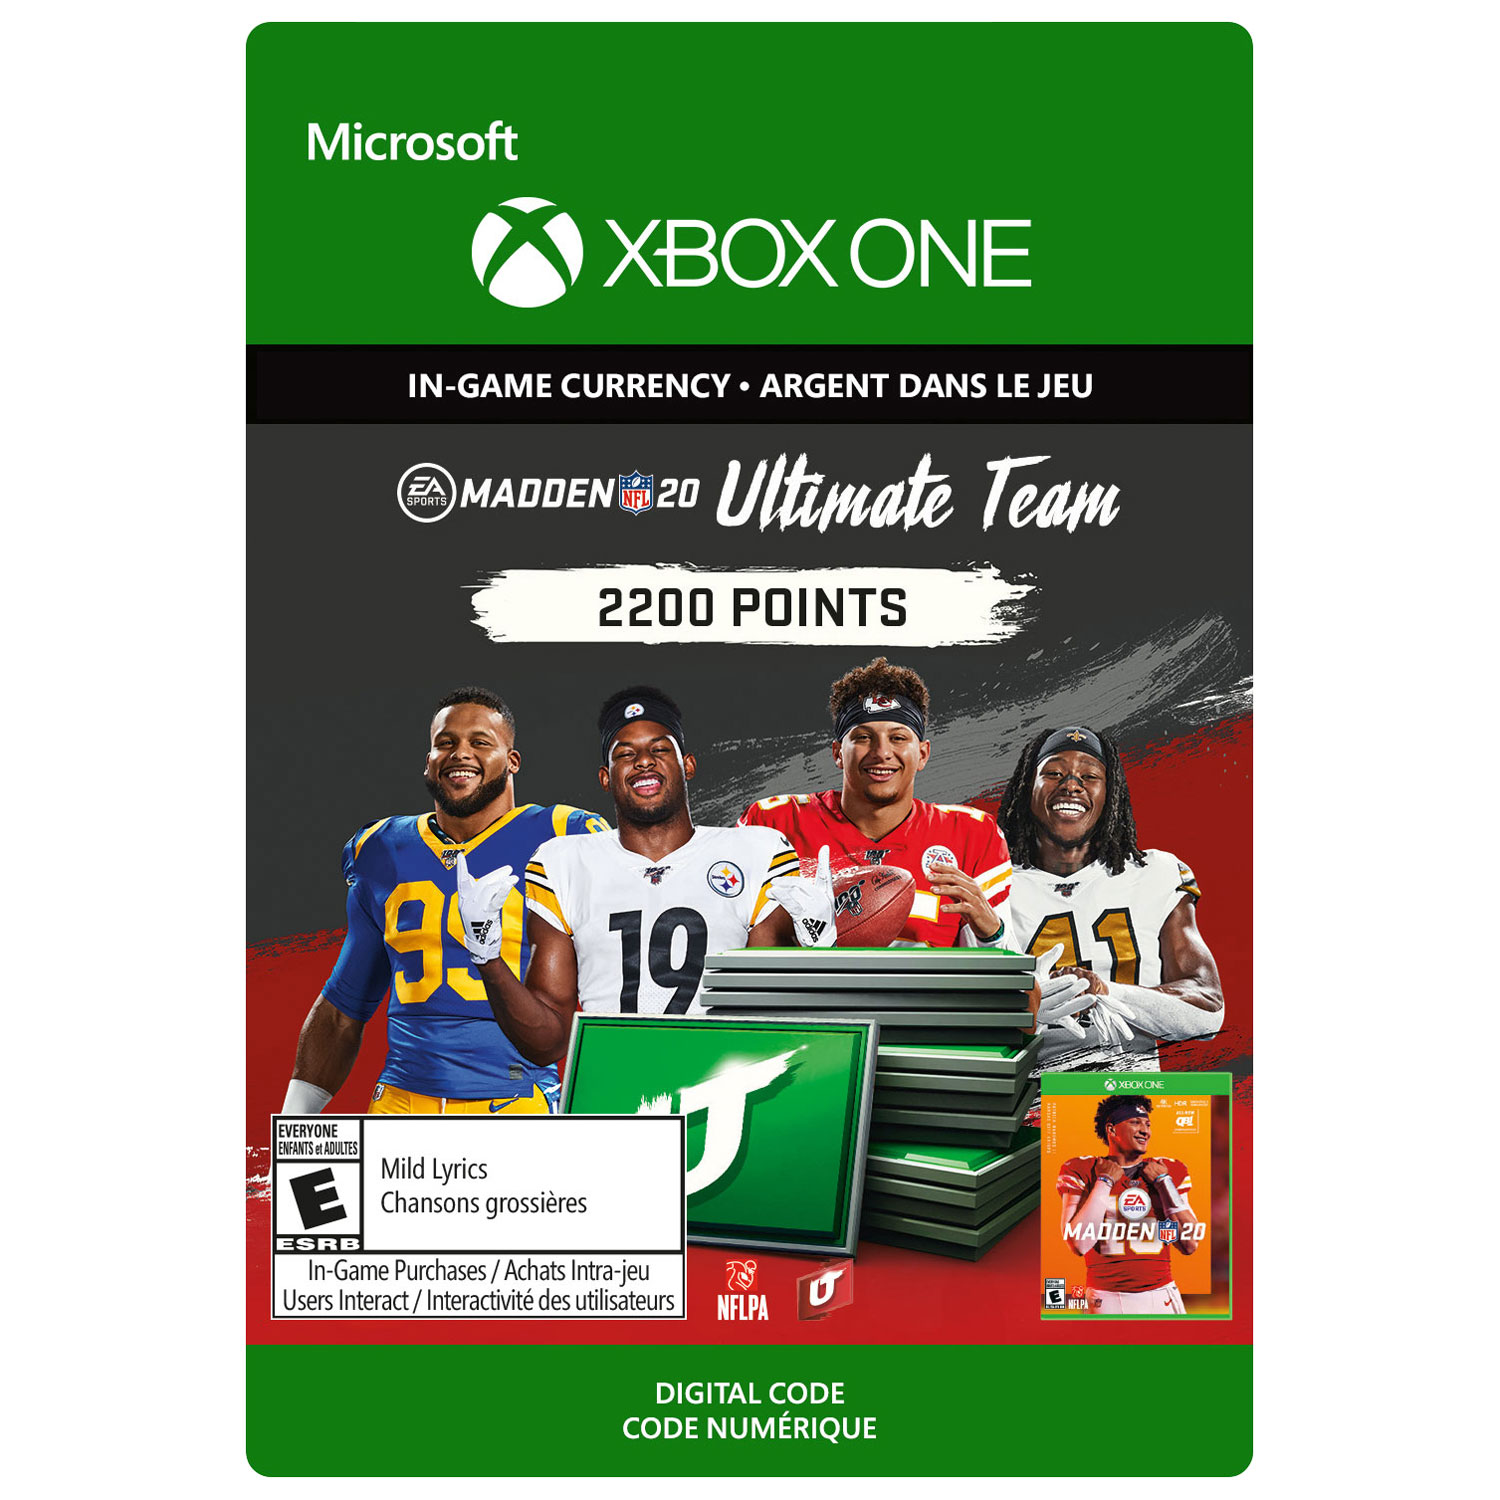 Madden NFL 20 2200 Madden Ultimate Team Points (Xbox One) - Digital Download